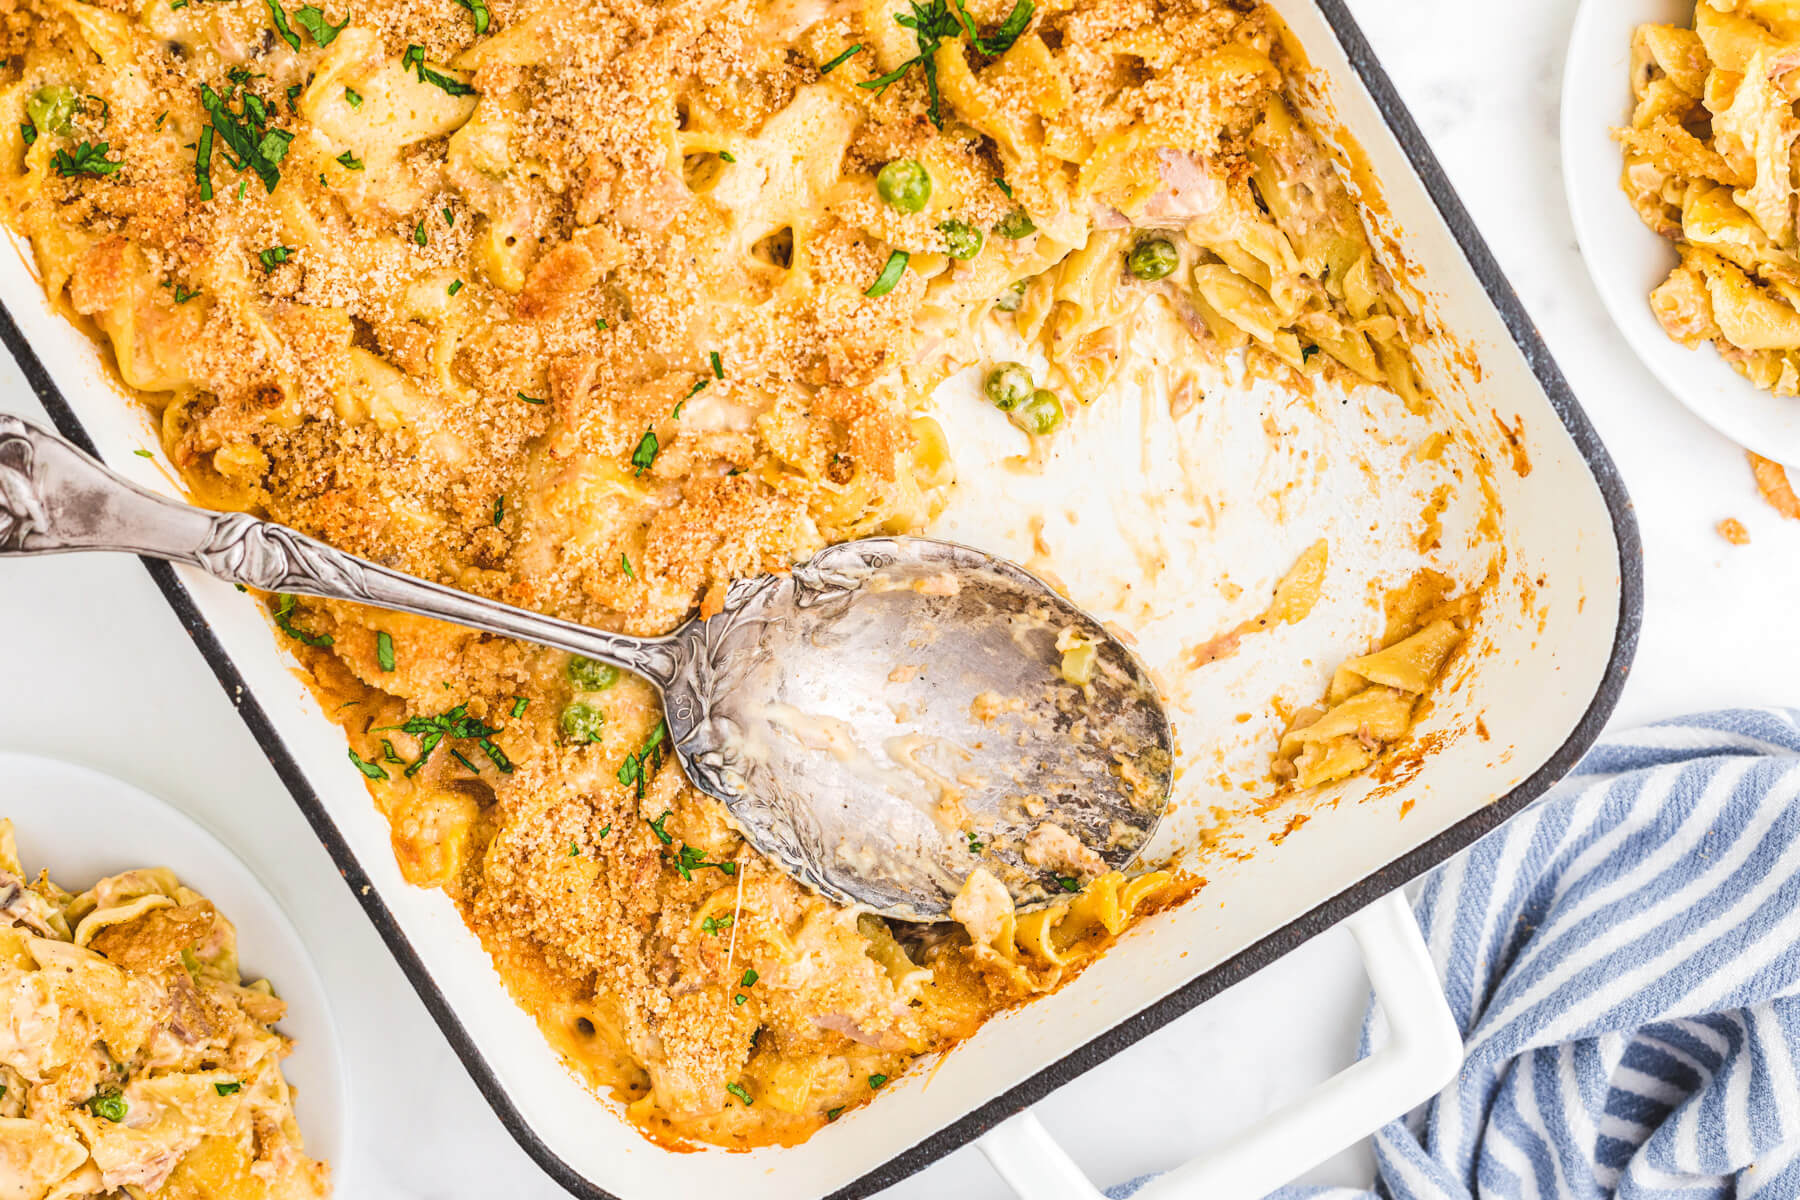 A white enamel baking pan half full of golden baked, crumb topped Tuna Noodle Casserole.